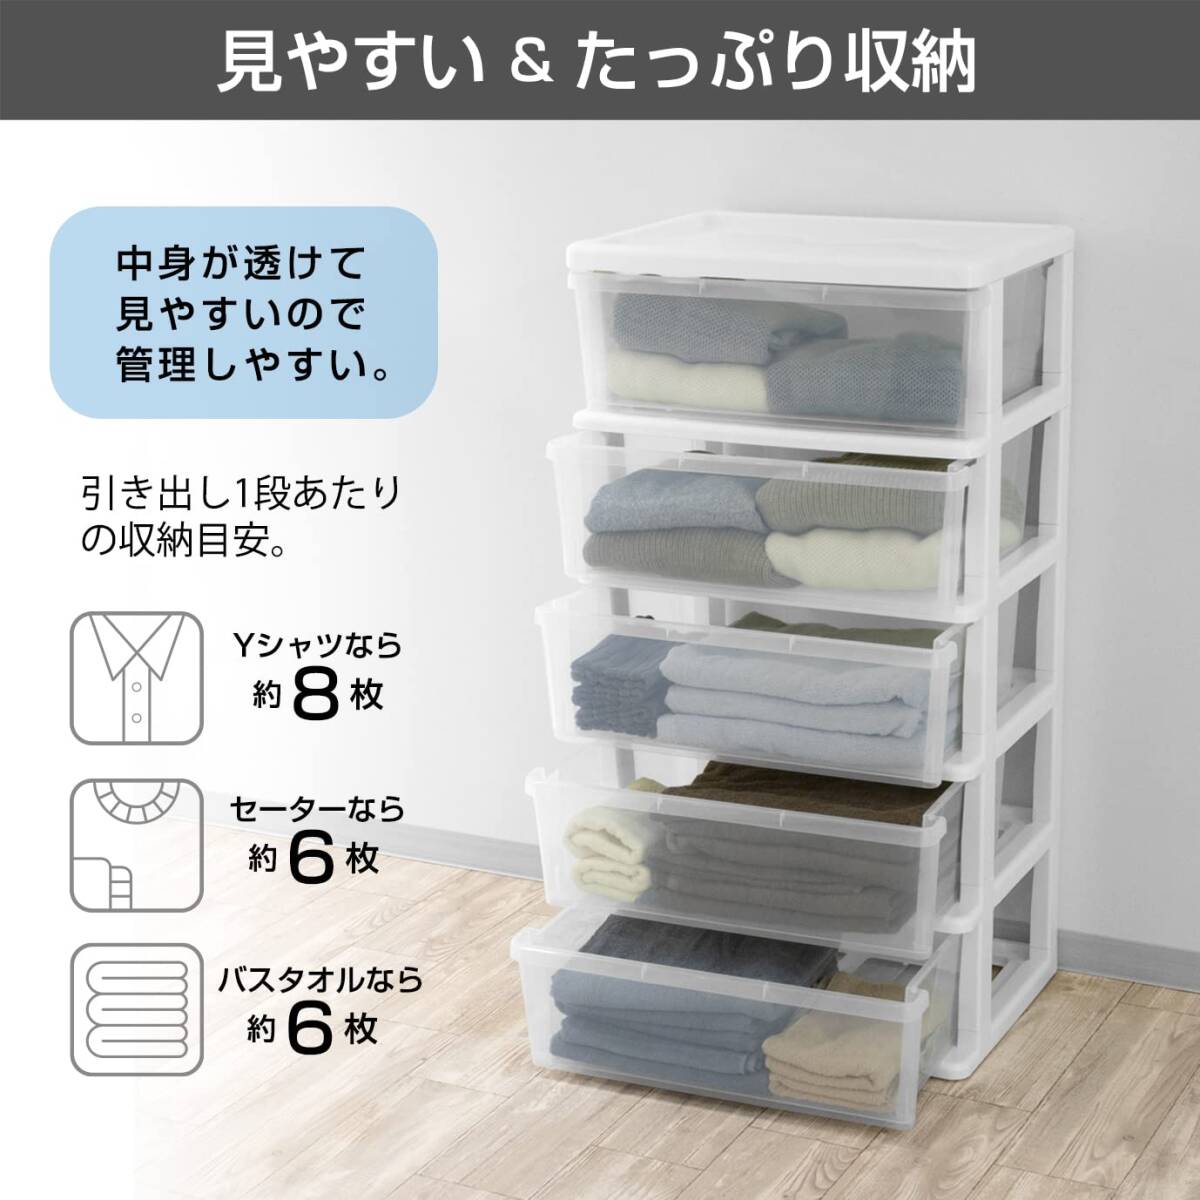 JEJa stage (JEJ Astage) storage chest She's wide 5 step white / clear made in Japan easy assembly width 54.0× depth 40